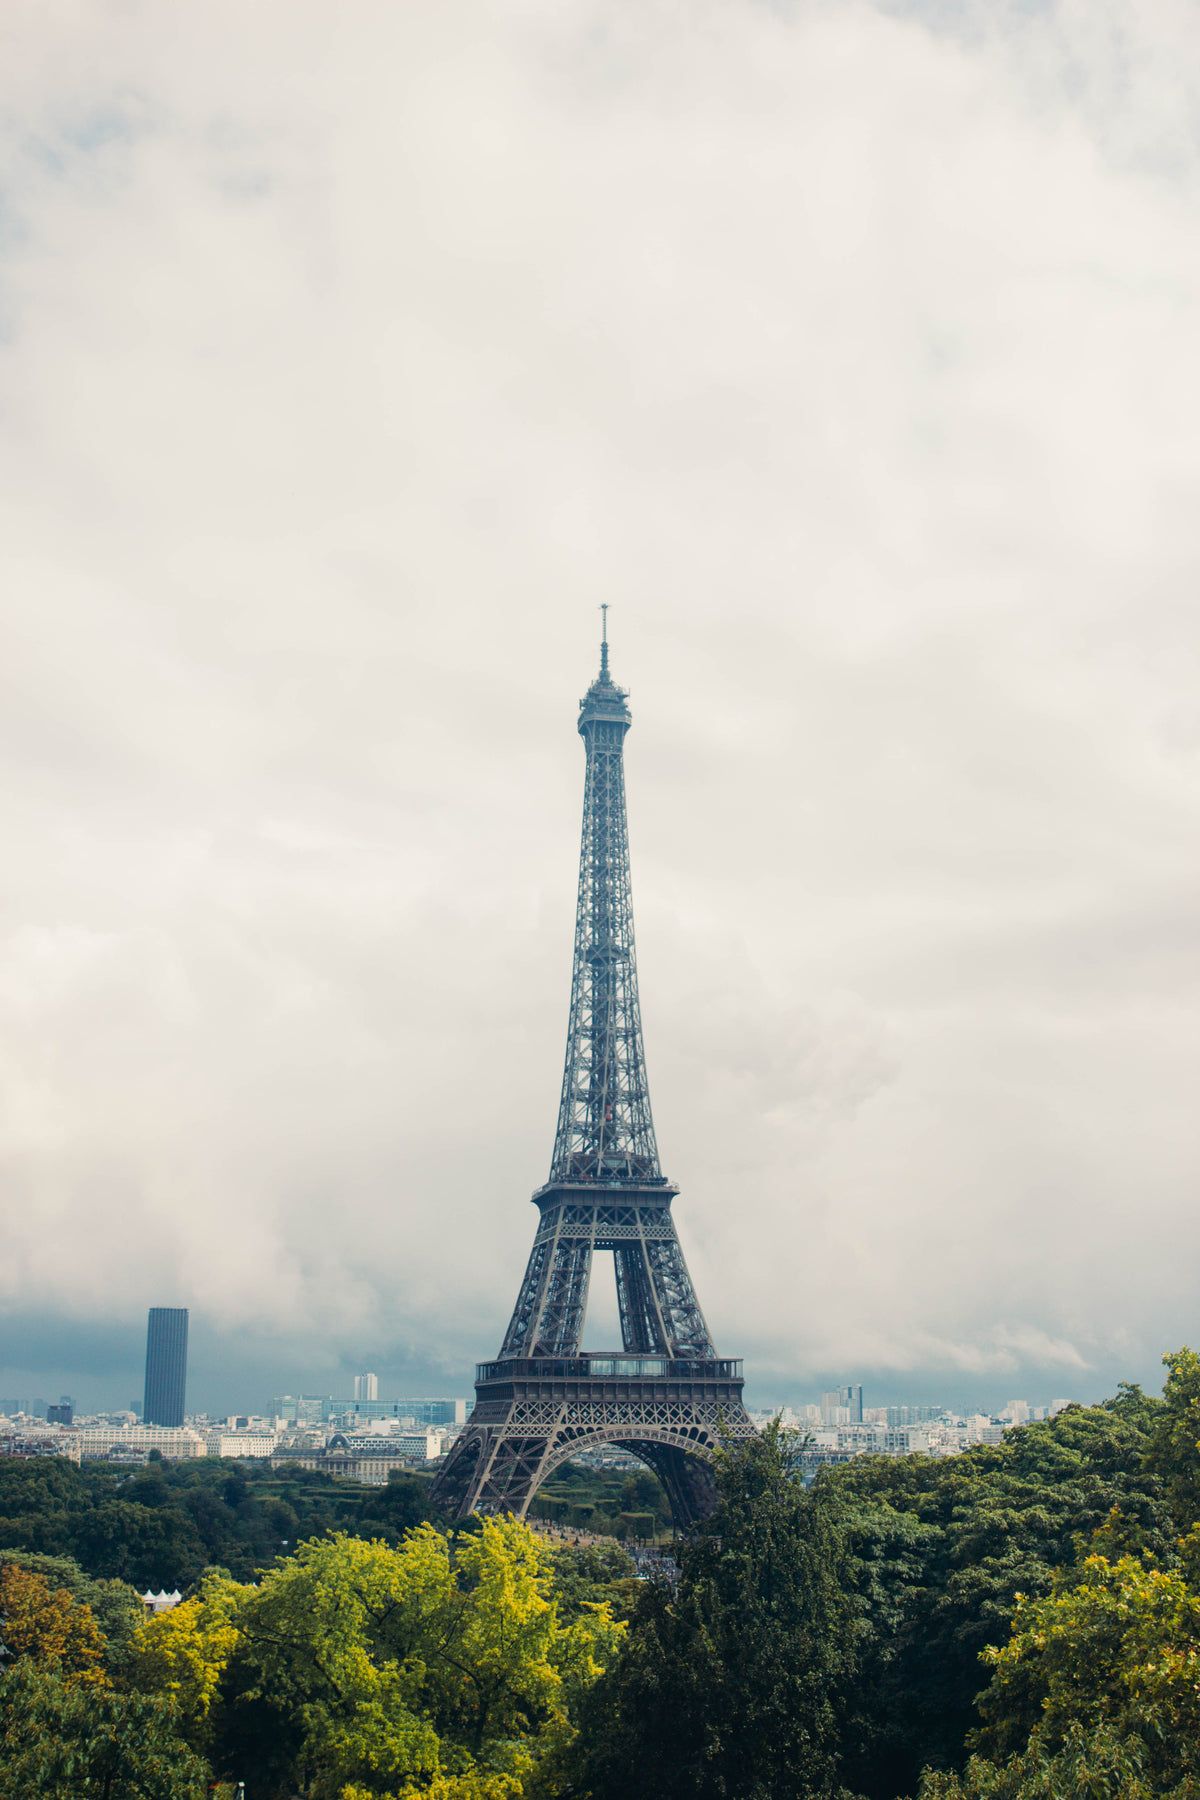 Eiffel Tower Image [HD]- Download Eiffel Tower Pics for Free